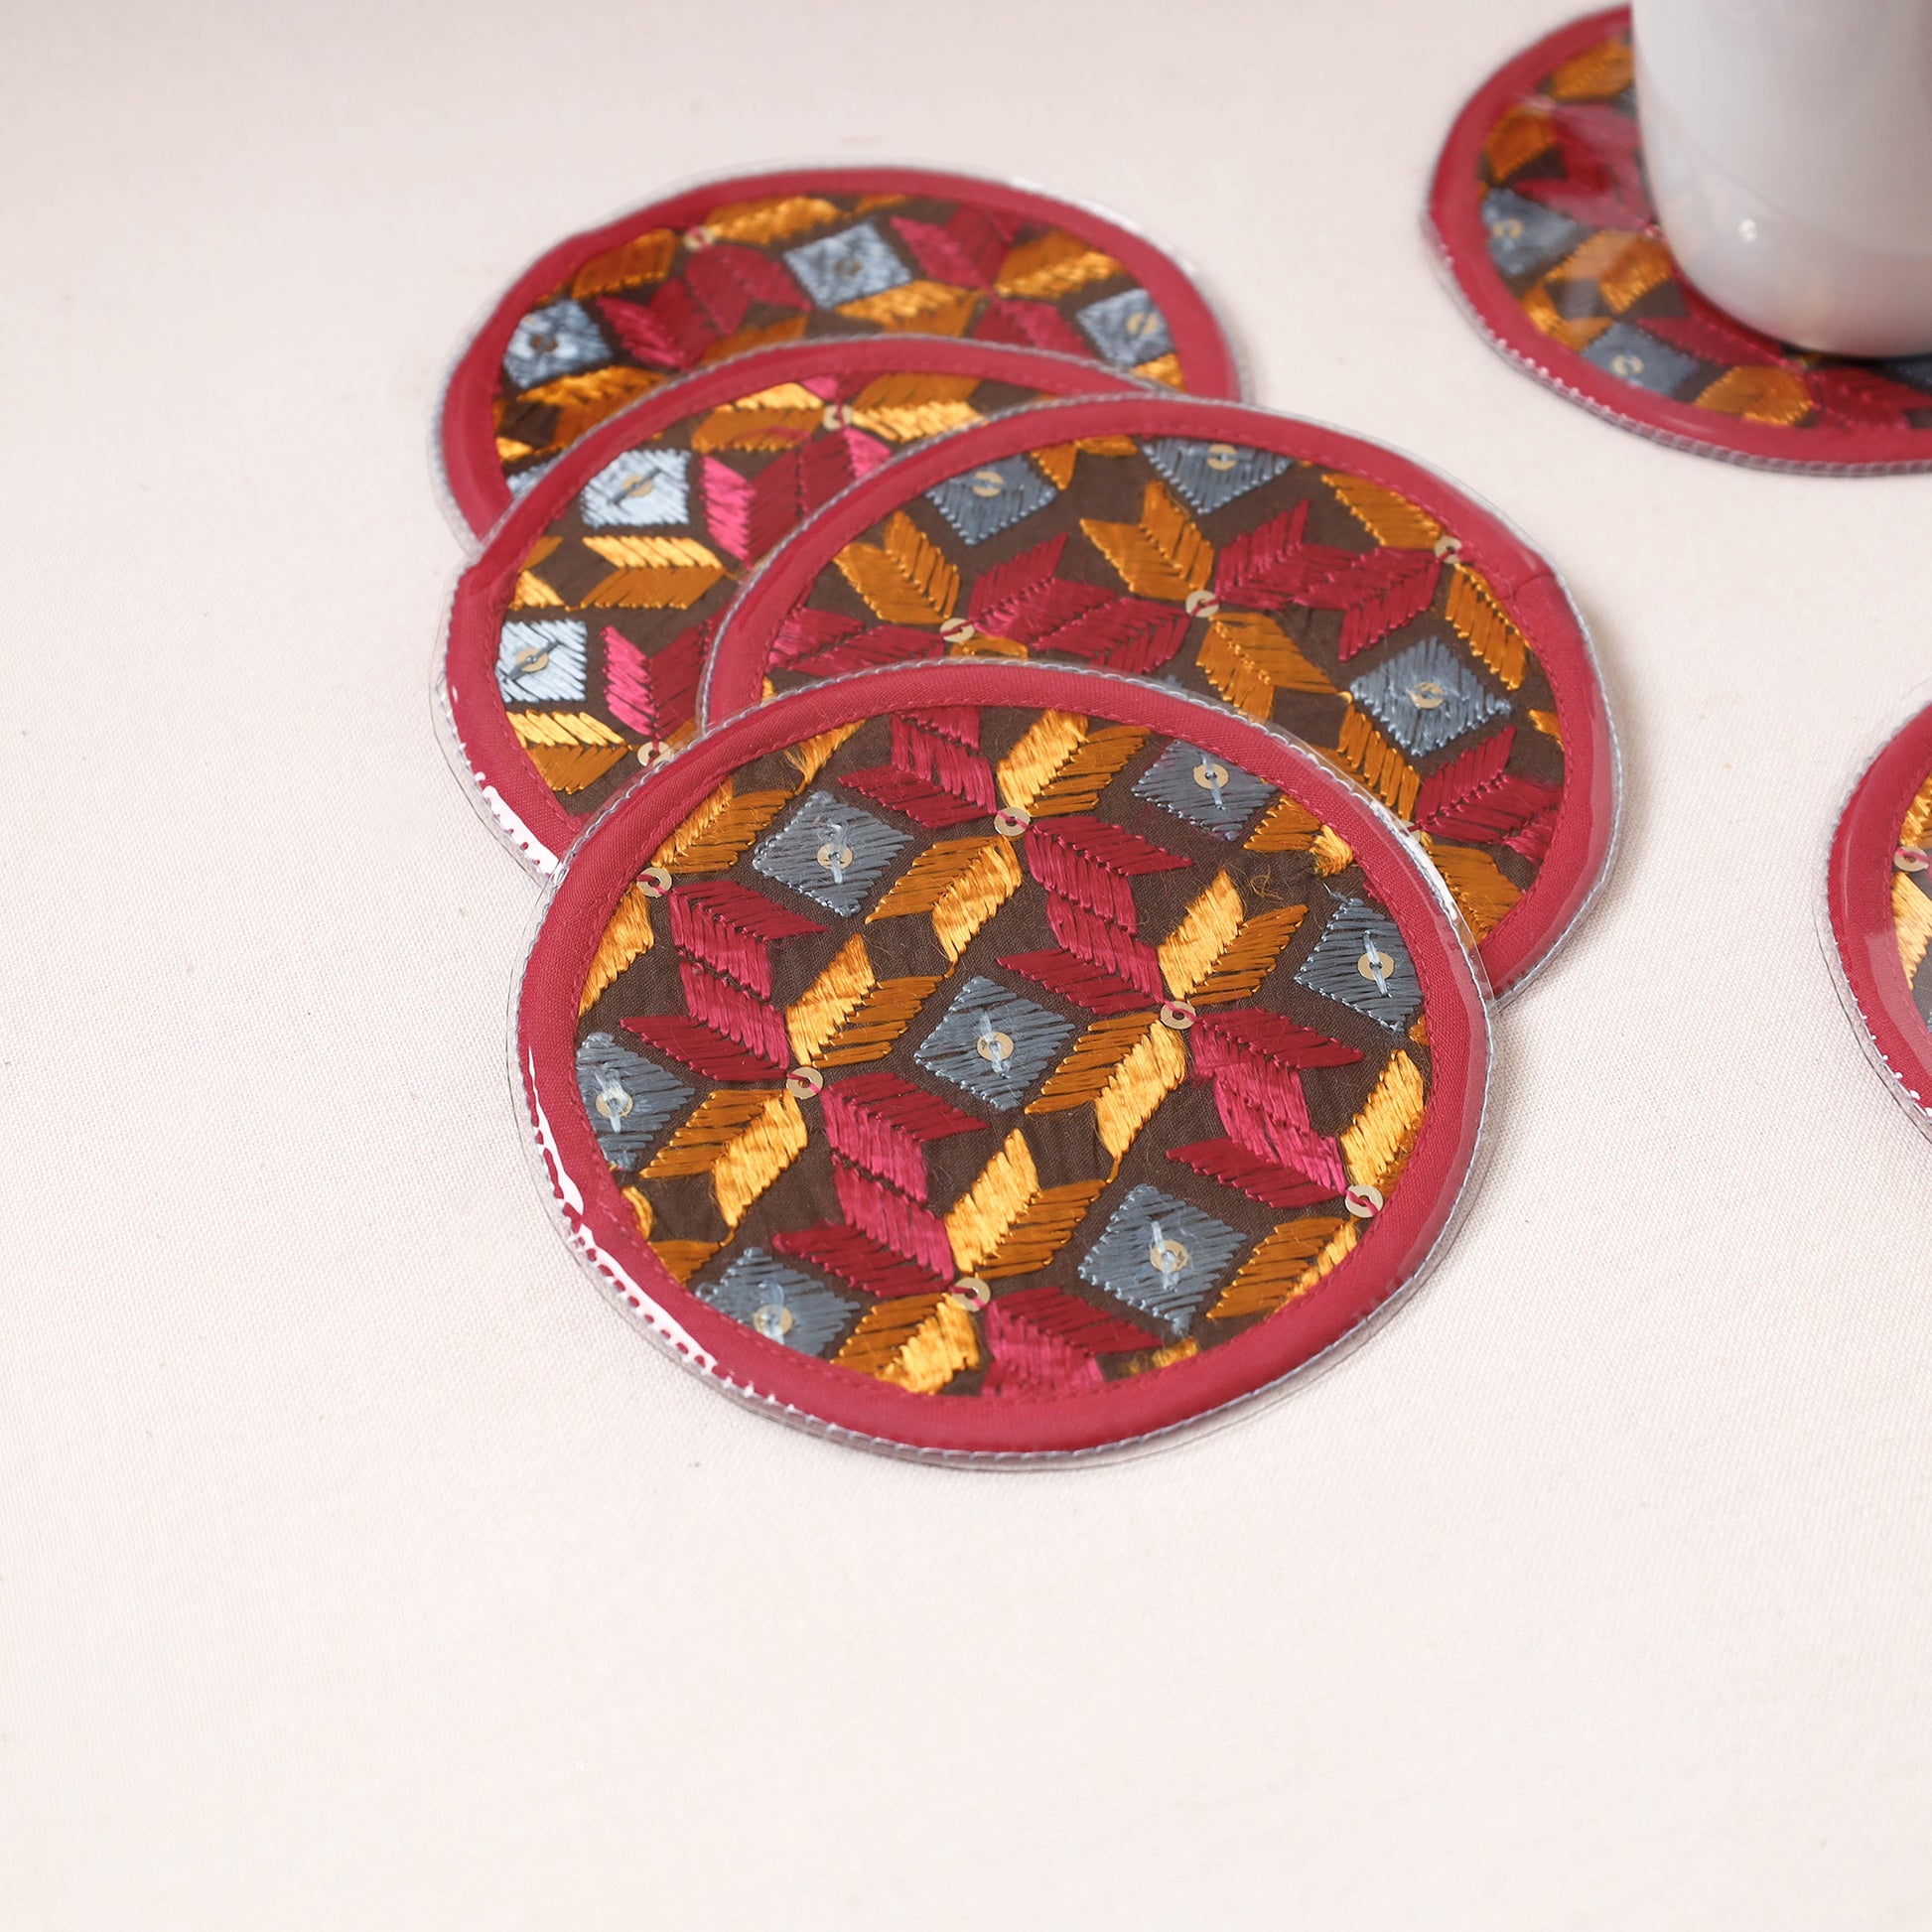 embroidery coasters